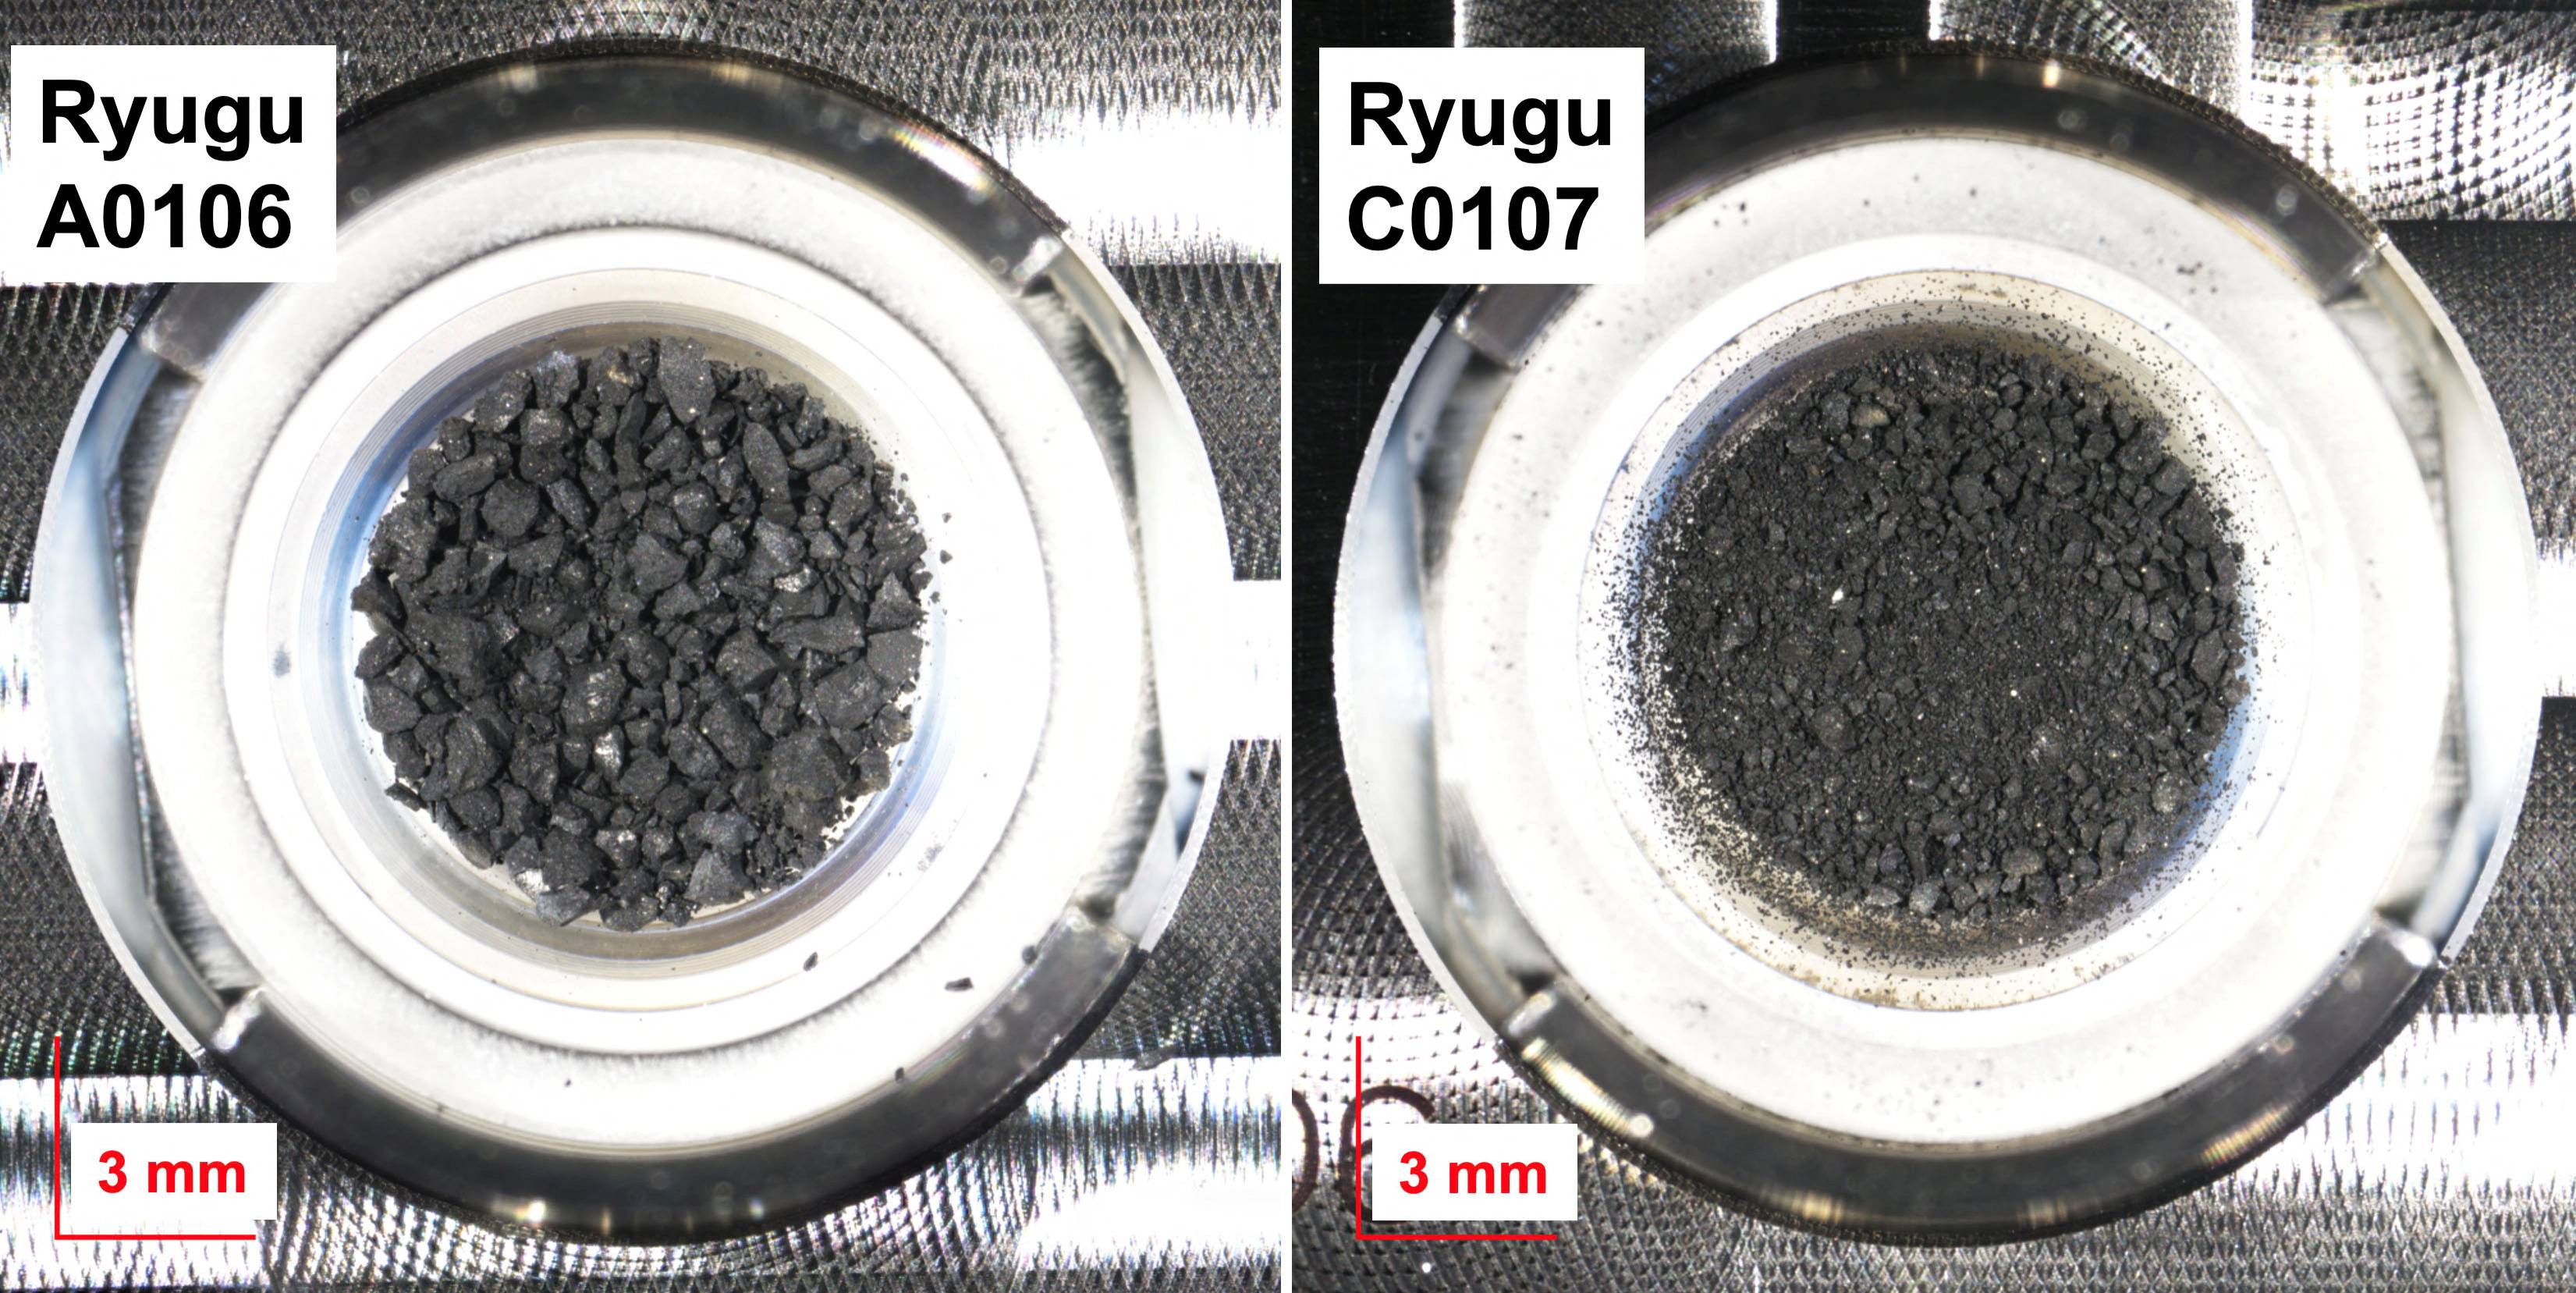 Carbonaceous rock samples retrieved from the asteroid Ryugu that were subjected to chemical analysis by Hayabusa2 soluble organic matter (SOM) team members | COURTESY OF JAXA / VIA REUTERS